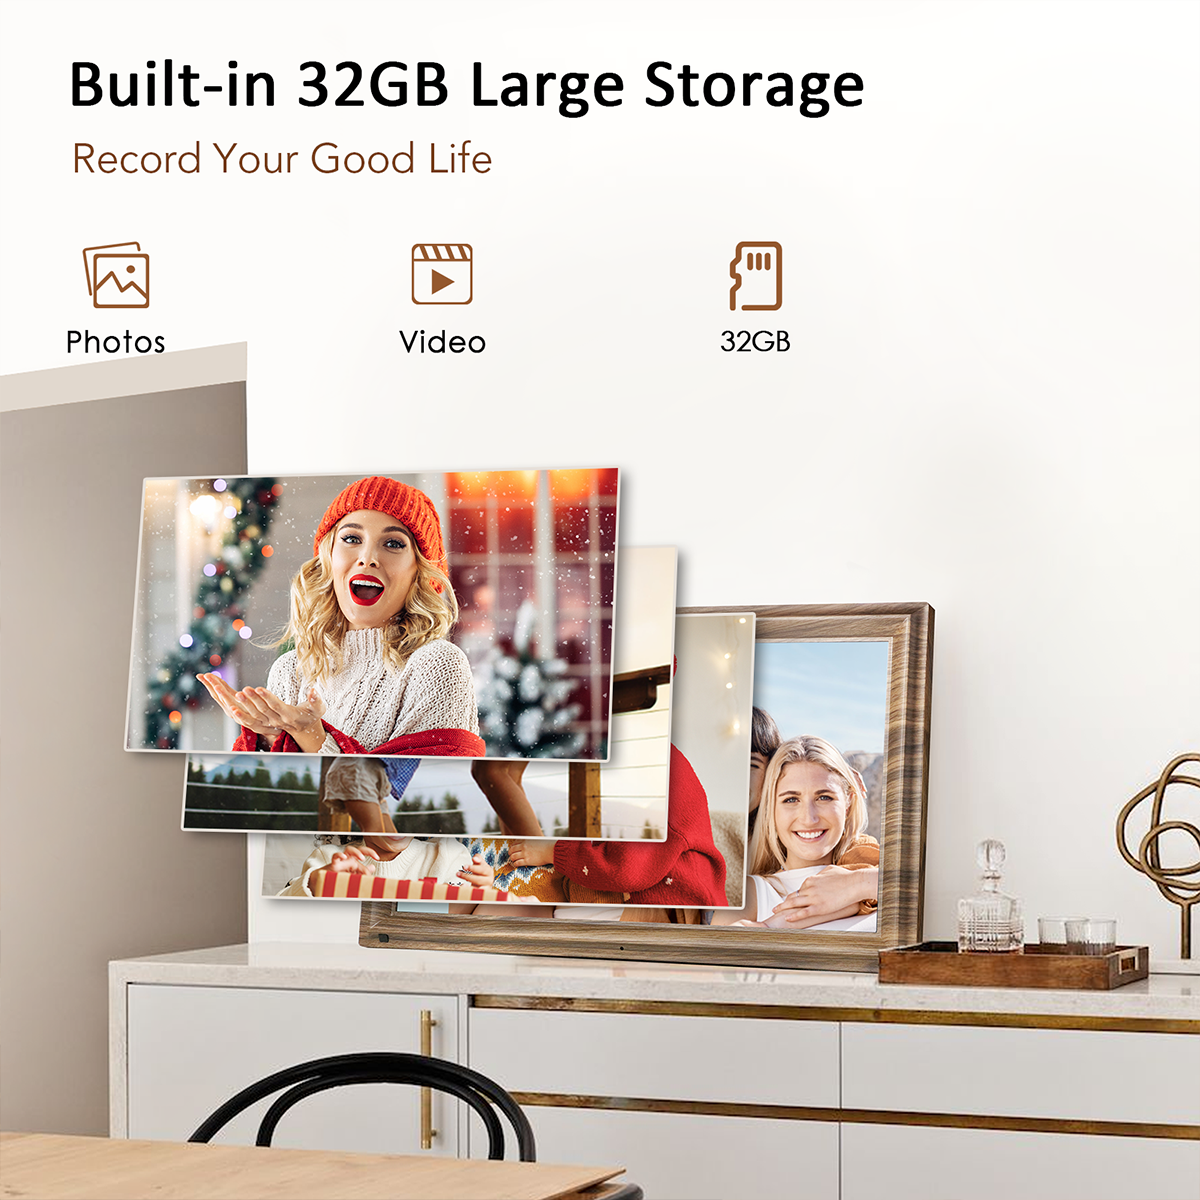 16 inch Large Digital Picture Frames, Canupdog Smart Wifi Digital Photo  Frames with 32GB Storage, Wall Mountable, Auto-Rotate, Motion Sensor, Share  Photo Video via App, Light Brown Wood Texture